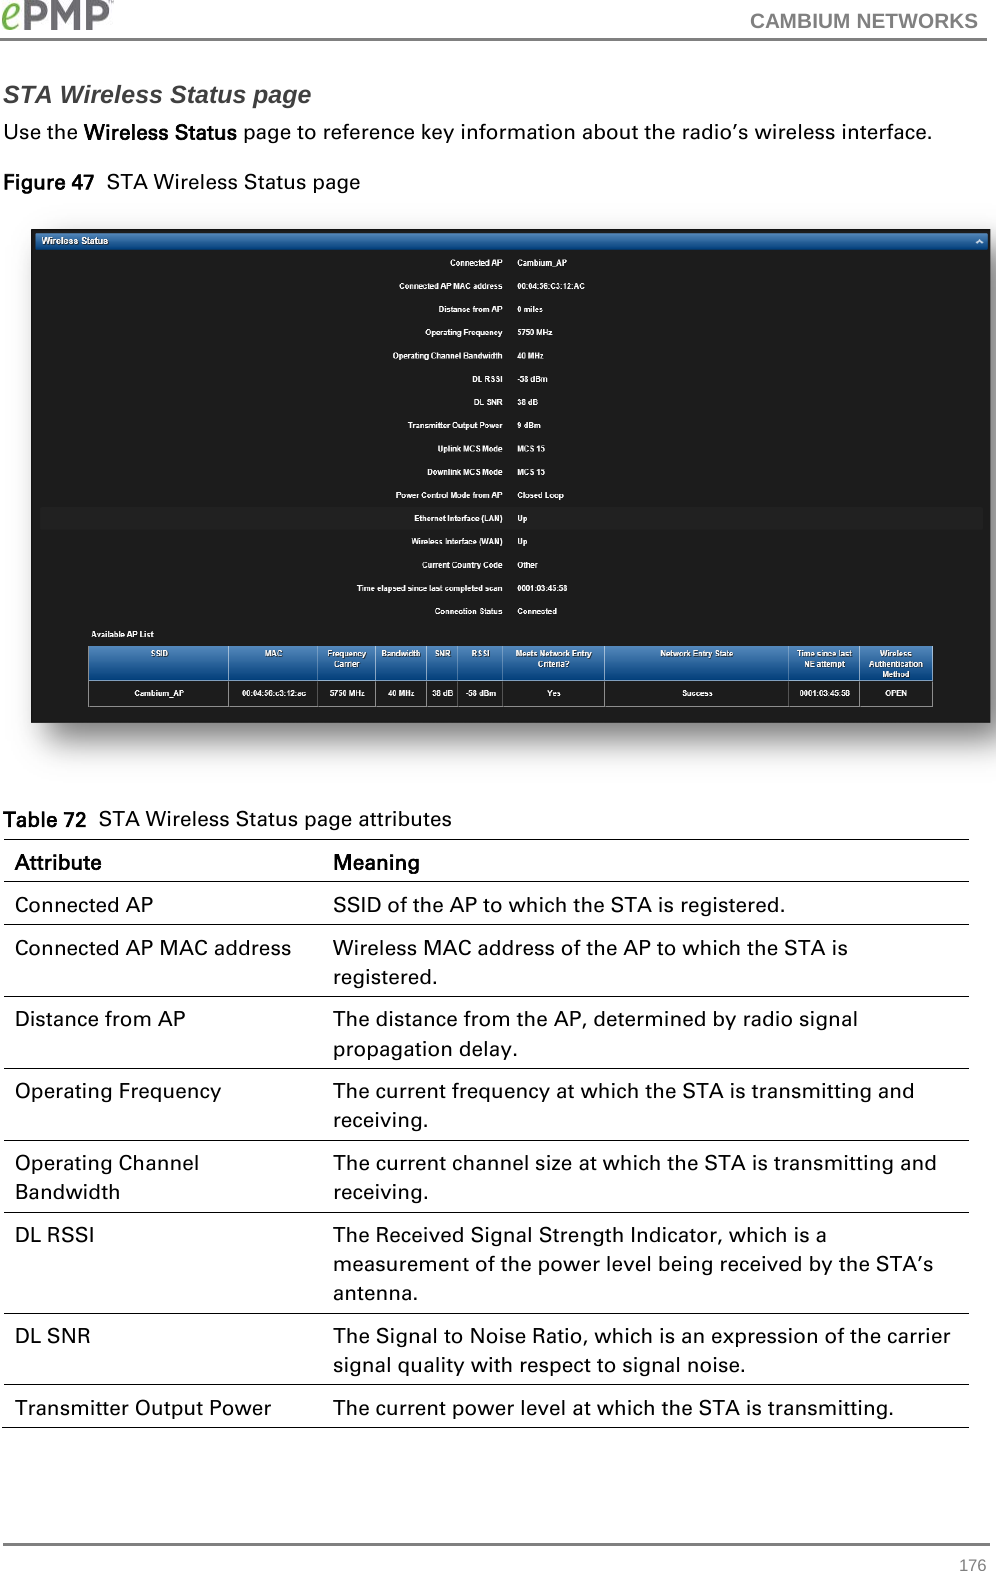 CAMBIUM NETWORKS  STA Wireless Status page Use the Wireless Status page to reference key information about the radio’s wireless interface. Figure 47  STA Wireless Status page  Table 72  STA Wireless Status page attributes Attribute Meaning Connected AP SSID of the AP to which the STA is registered. Connected AP MAC address Wireless MAC address of the AP to which the STA is registered. Distance from AP The distance from the AP, determined by radio signal propagation delay. Operating Frequency The current frequency at which the STA is transmitting and receiving. Operating Channel Bandwidth The current channel size at which the STA is transmitting and receiving. DL RSSI The Received Signal Strength Indicator, which is a measurement of the power level being received by the STA’s antenna. DL SNR The Signal to Noise Ratio, which is an expression of the carrier signal quality with respect to signal noise. Transmitter Output Power The current power level at which the STA is transmitting.  176 